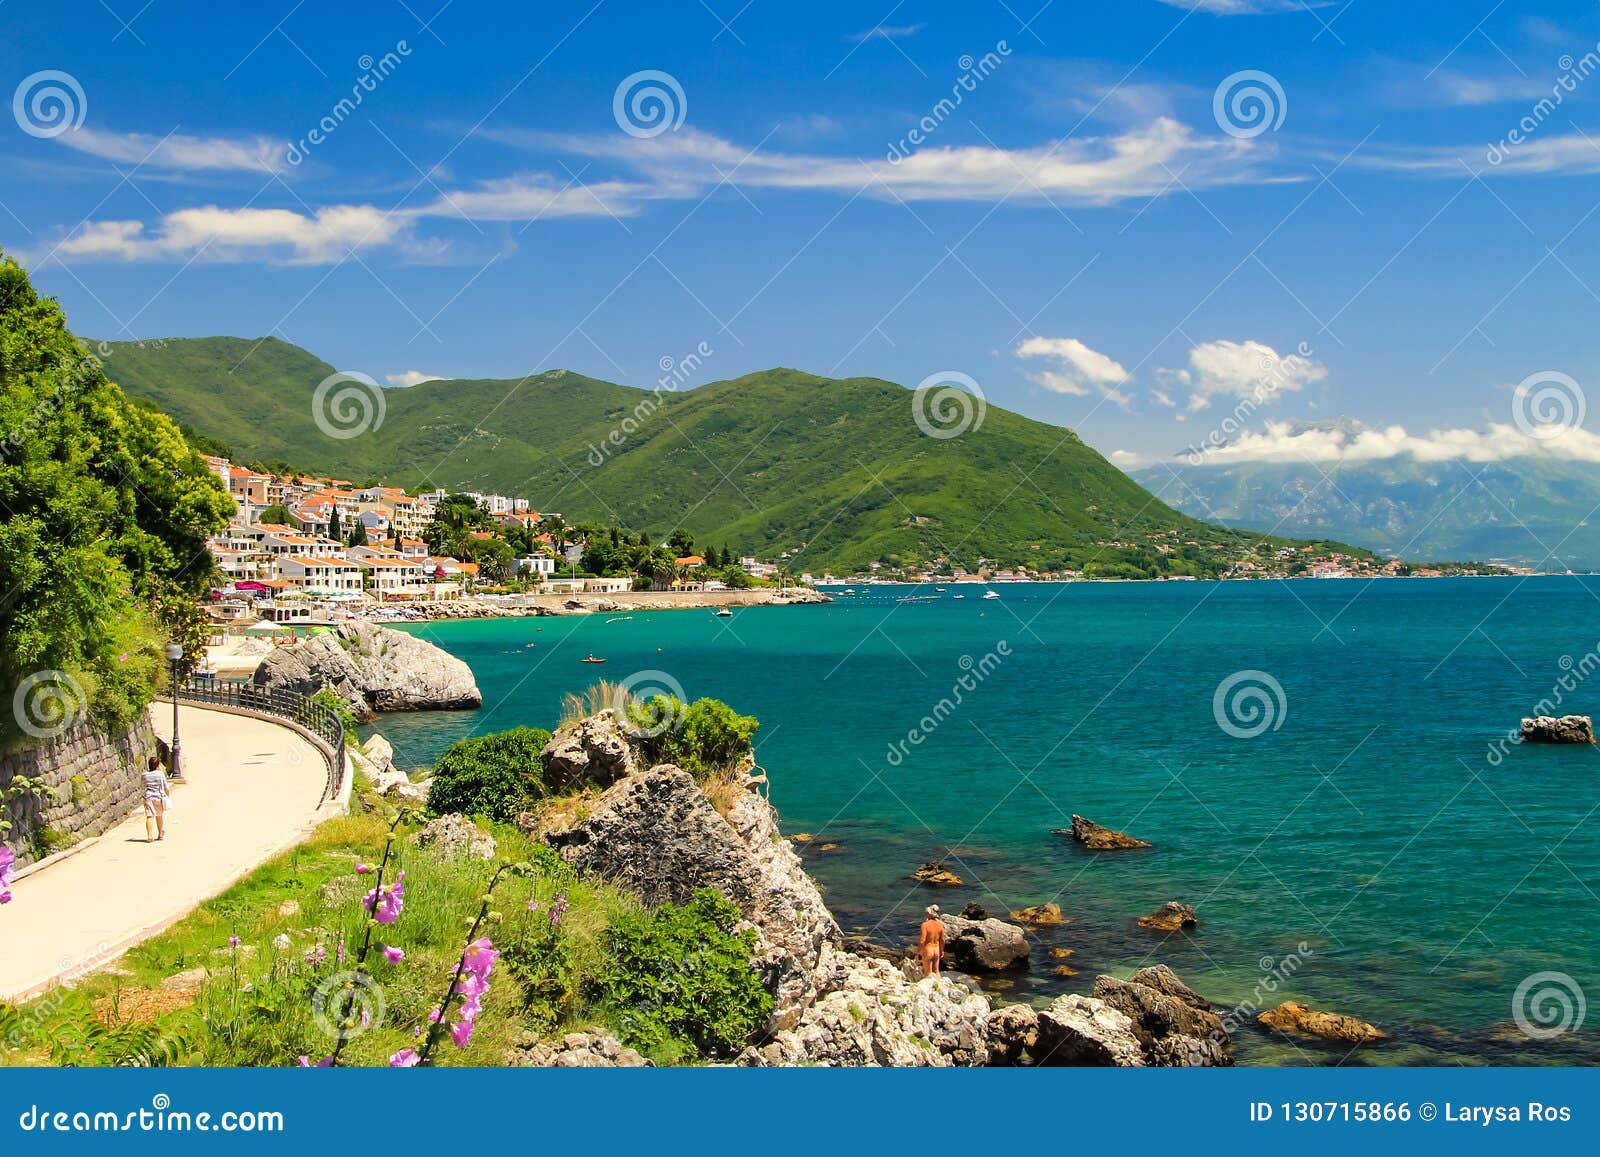 The Picturesque City Of Herceg Novi On The Shore Of The Kotor Bay In The Mountains Of Montenegro Stock Photo Image Of Ocean Rocks 130715866